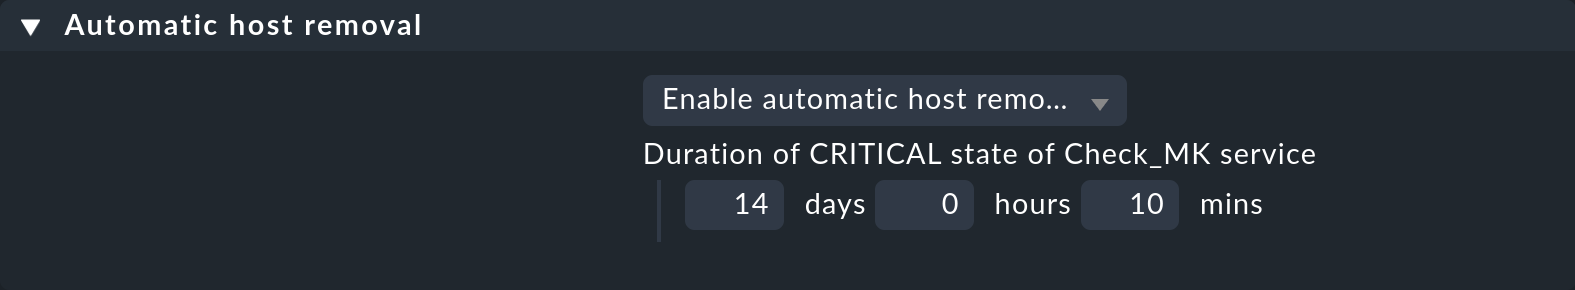 Rule specifying the time period triggering automatic removal of hosts.